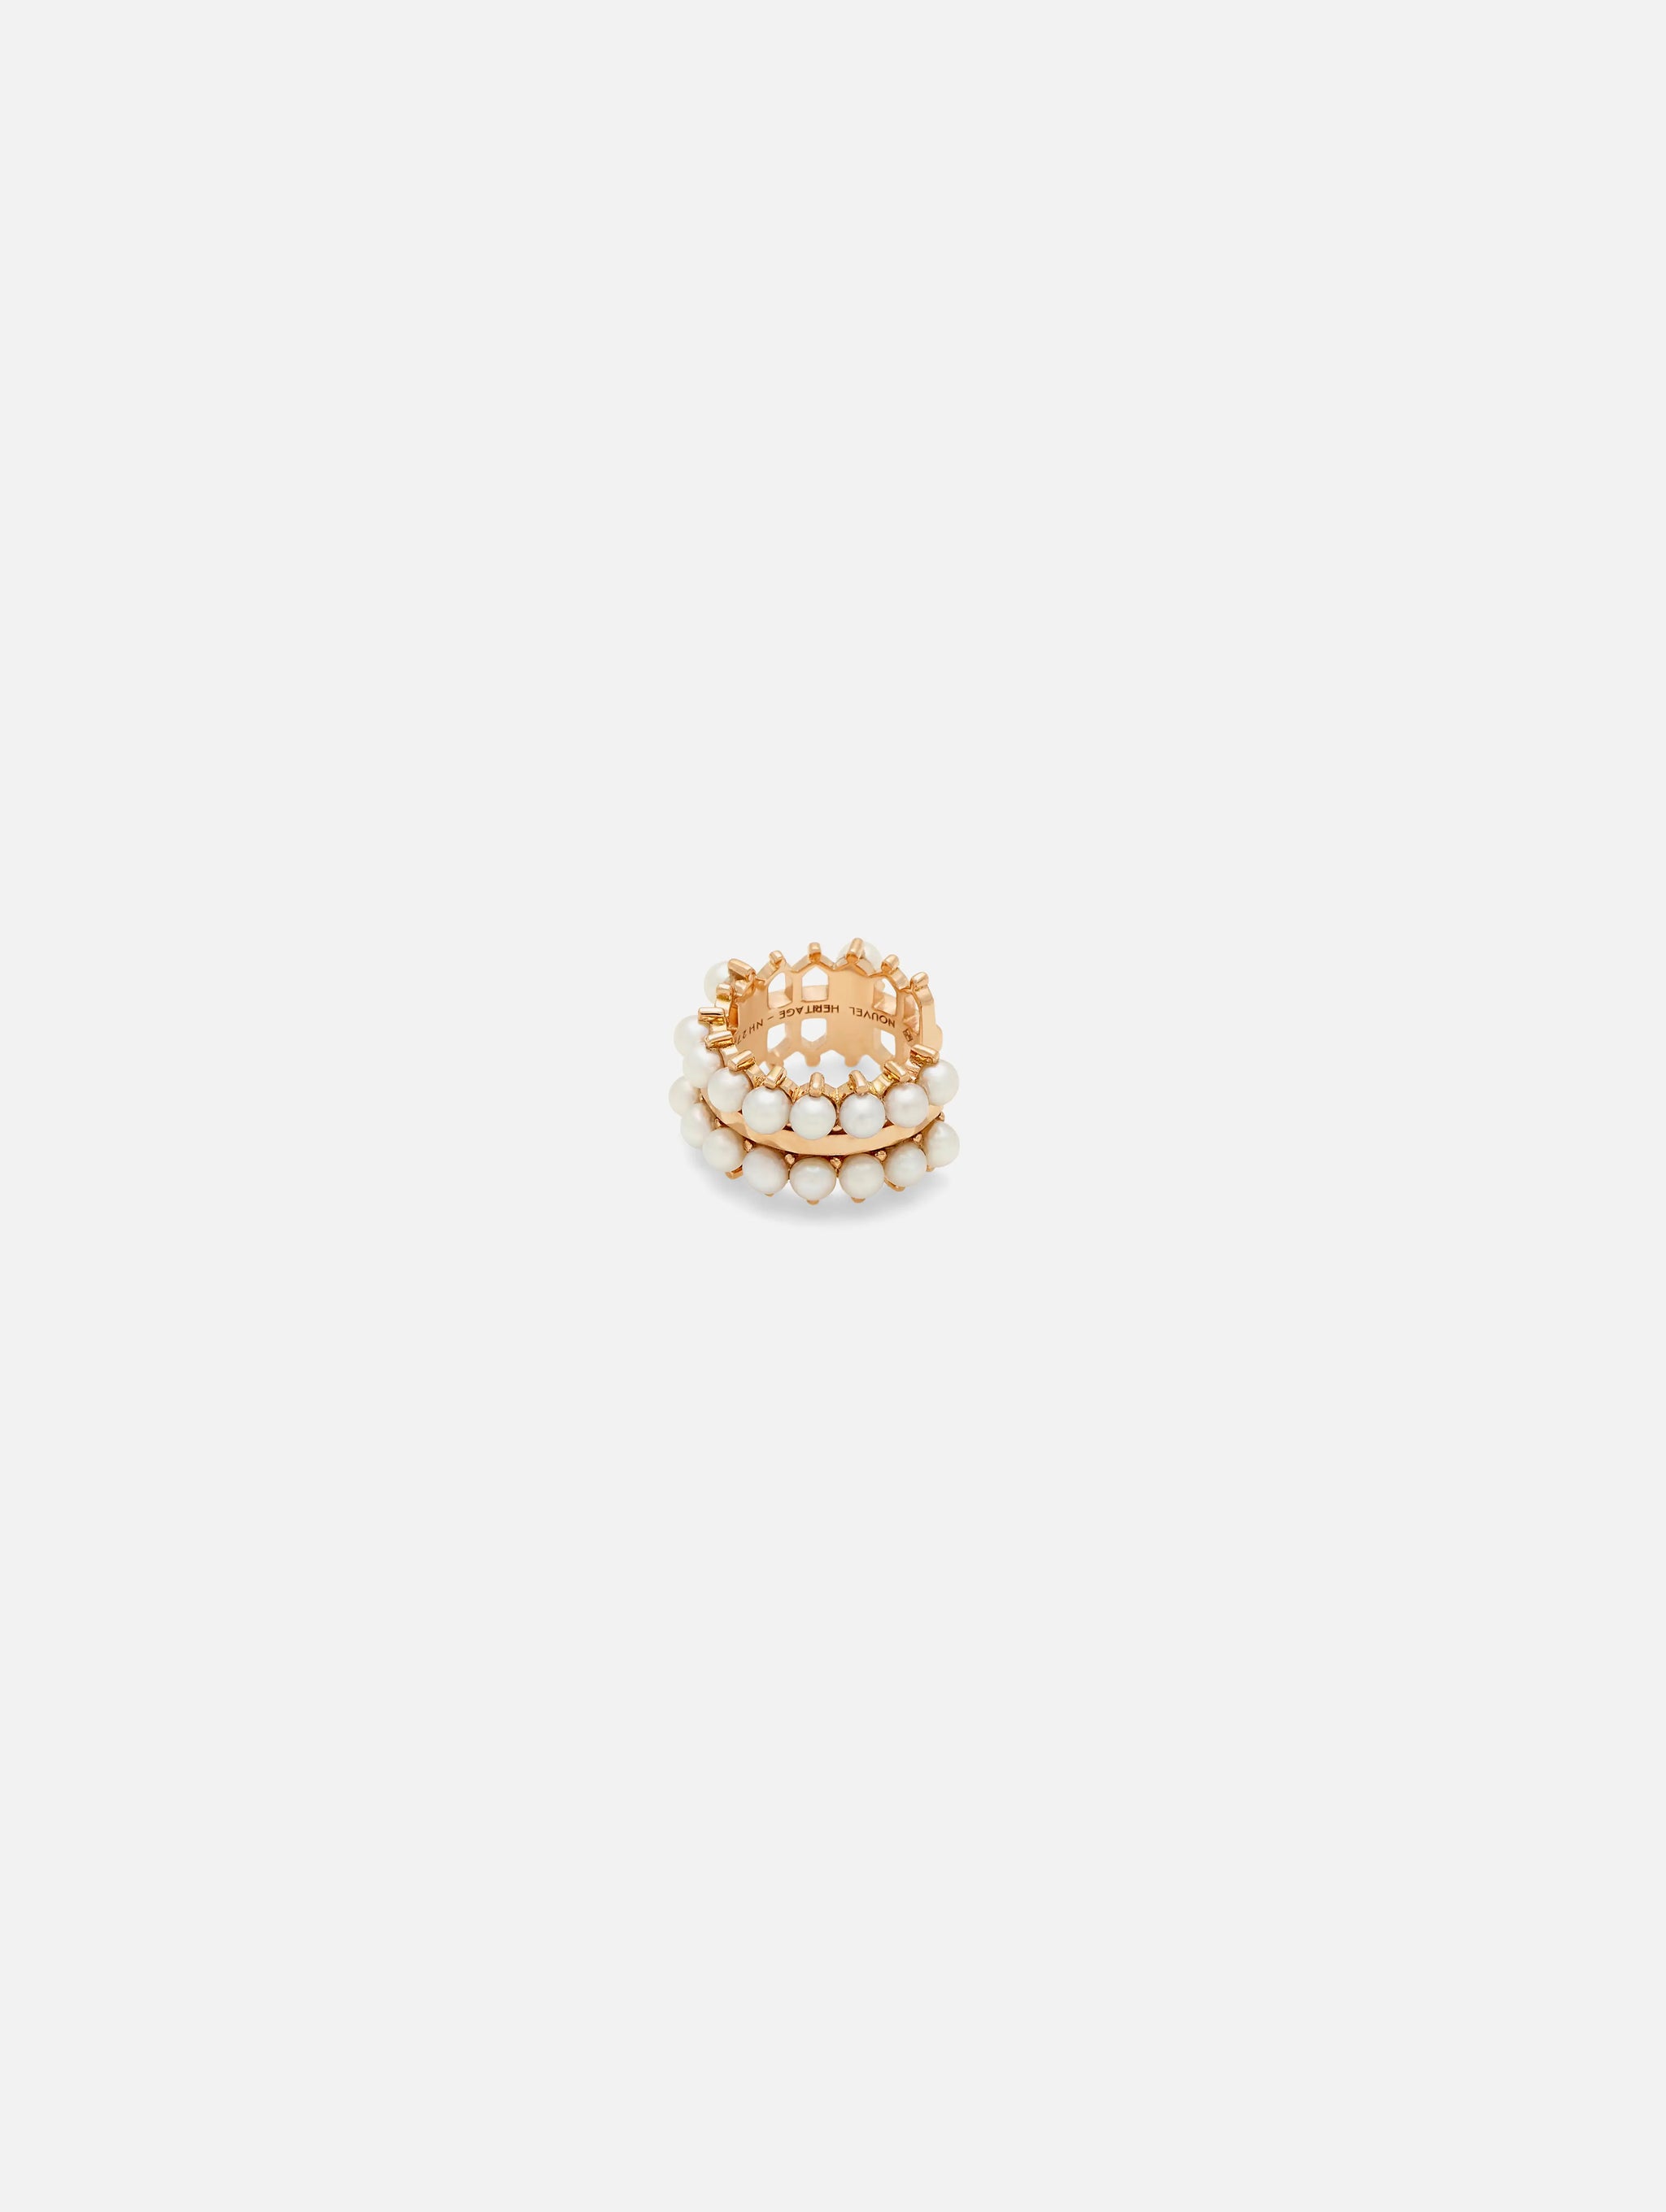 Double Pearl Ear Cuff in Rose Gold - 1 - Nouvel Heritage